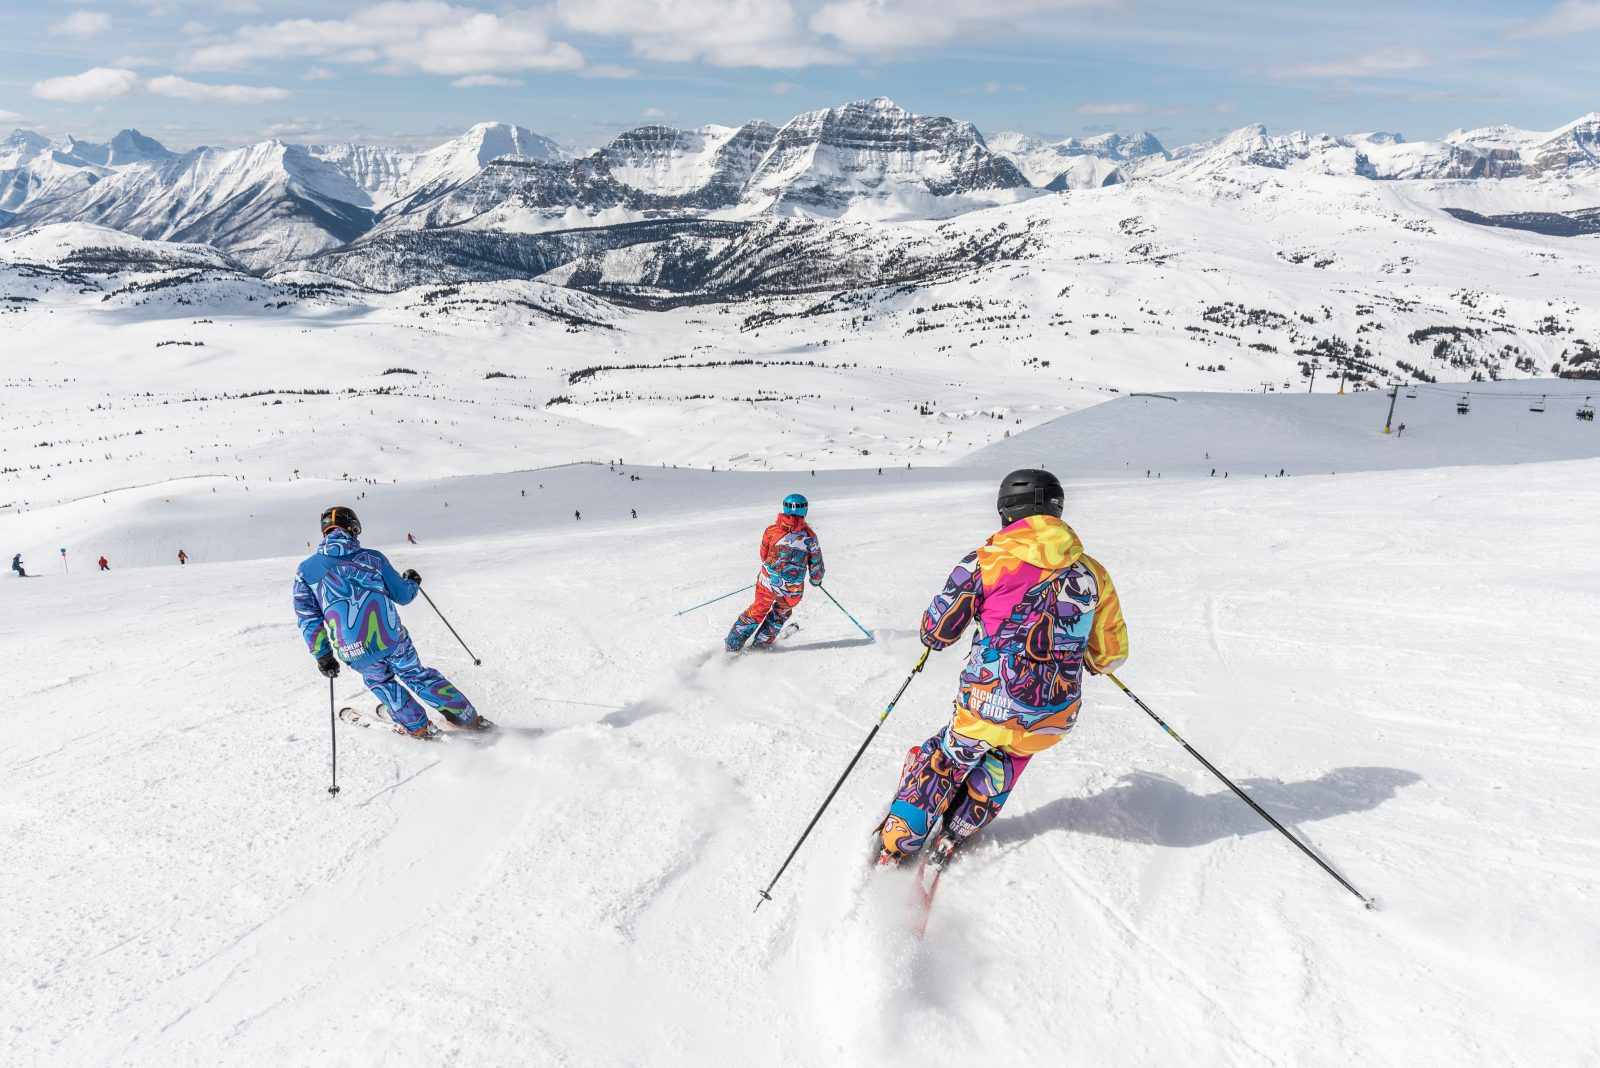 How to Plan the Perfect Ski Trip: The Ultimate Guide to Planning Your First Ski Holiday